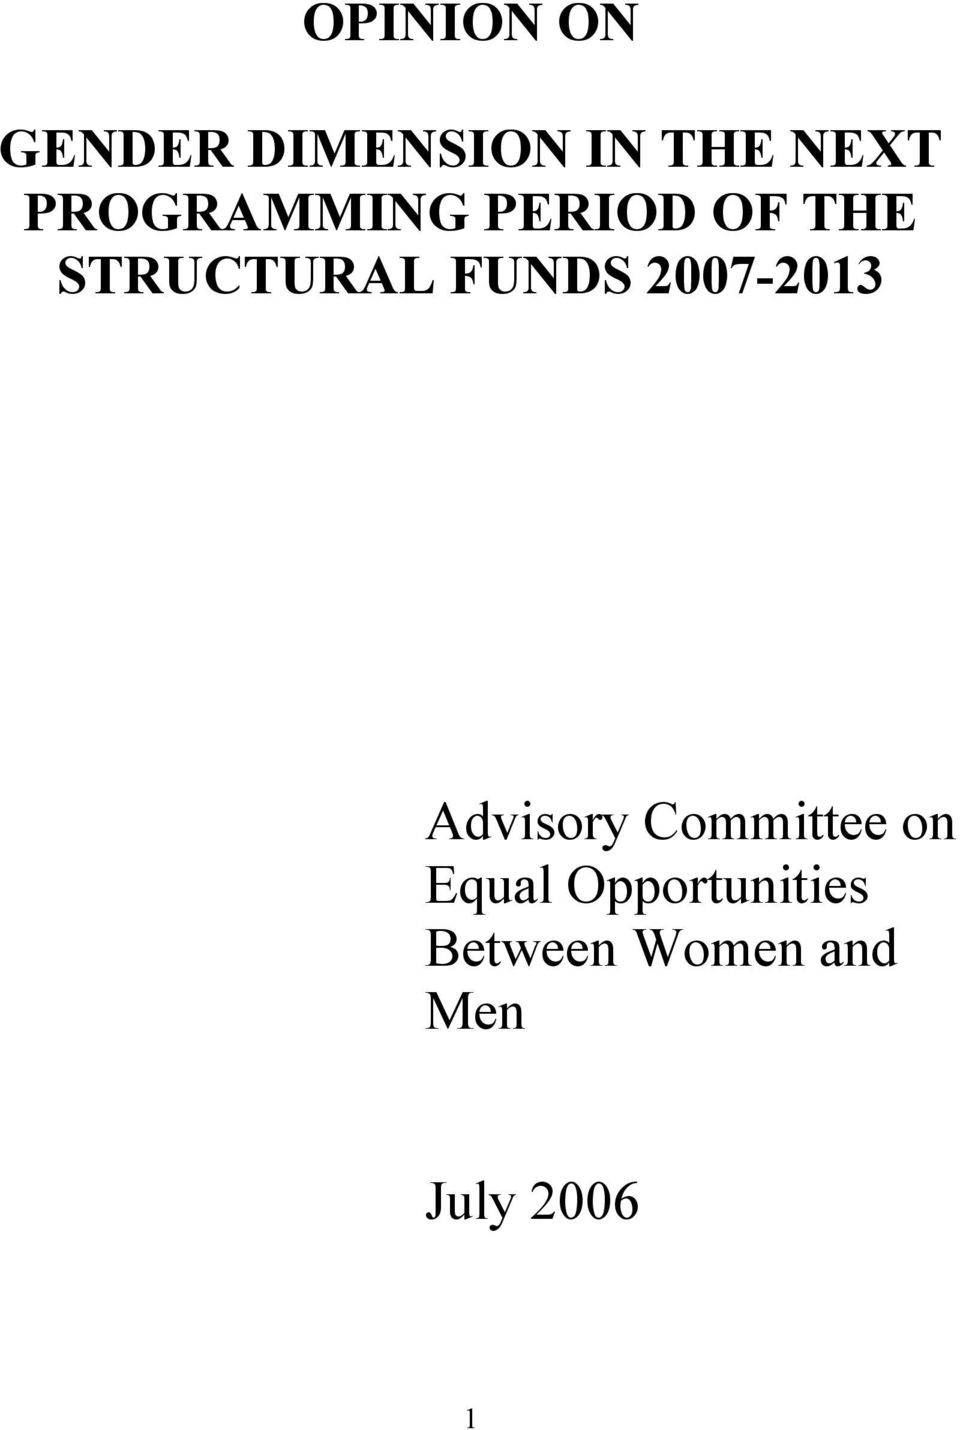 FUNDS 2007-2013 Advisory Committee on